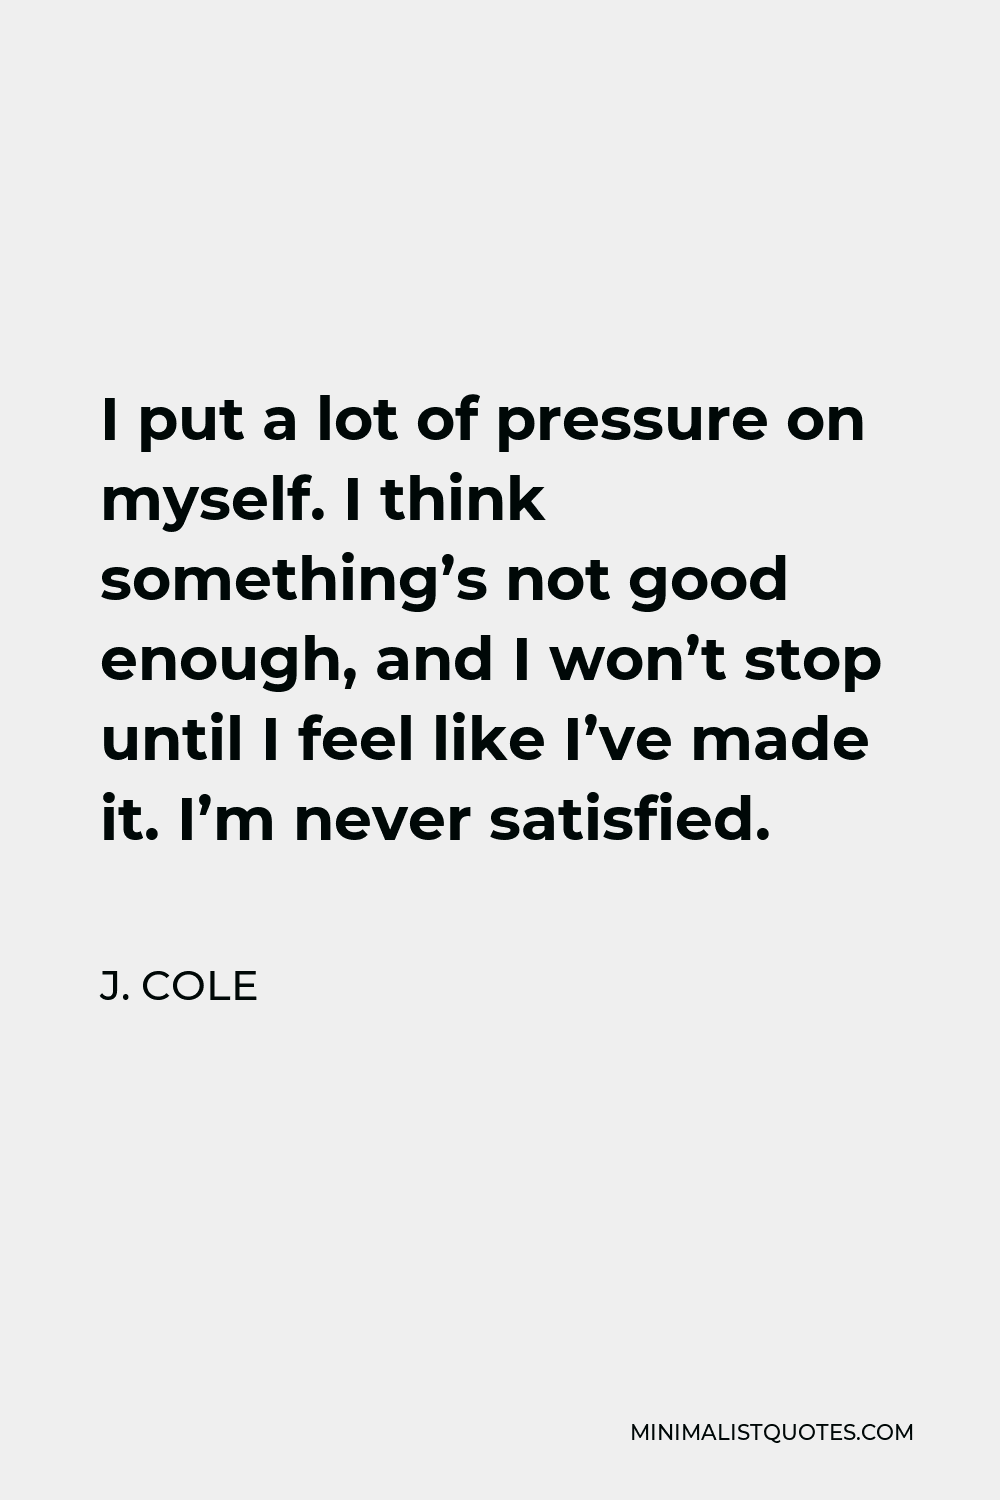 J. Cole Quote - I put a lot of pressure on myself. I think something’s not good enough, and I won’t stop until I feel like I’ve made it. I’m never satisfied.